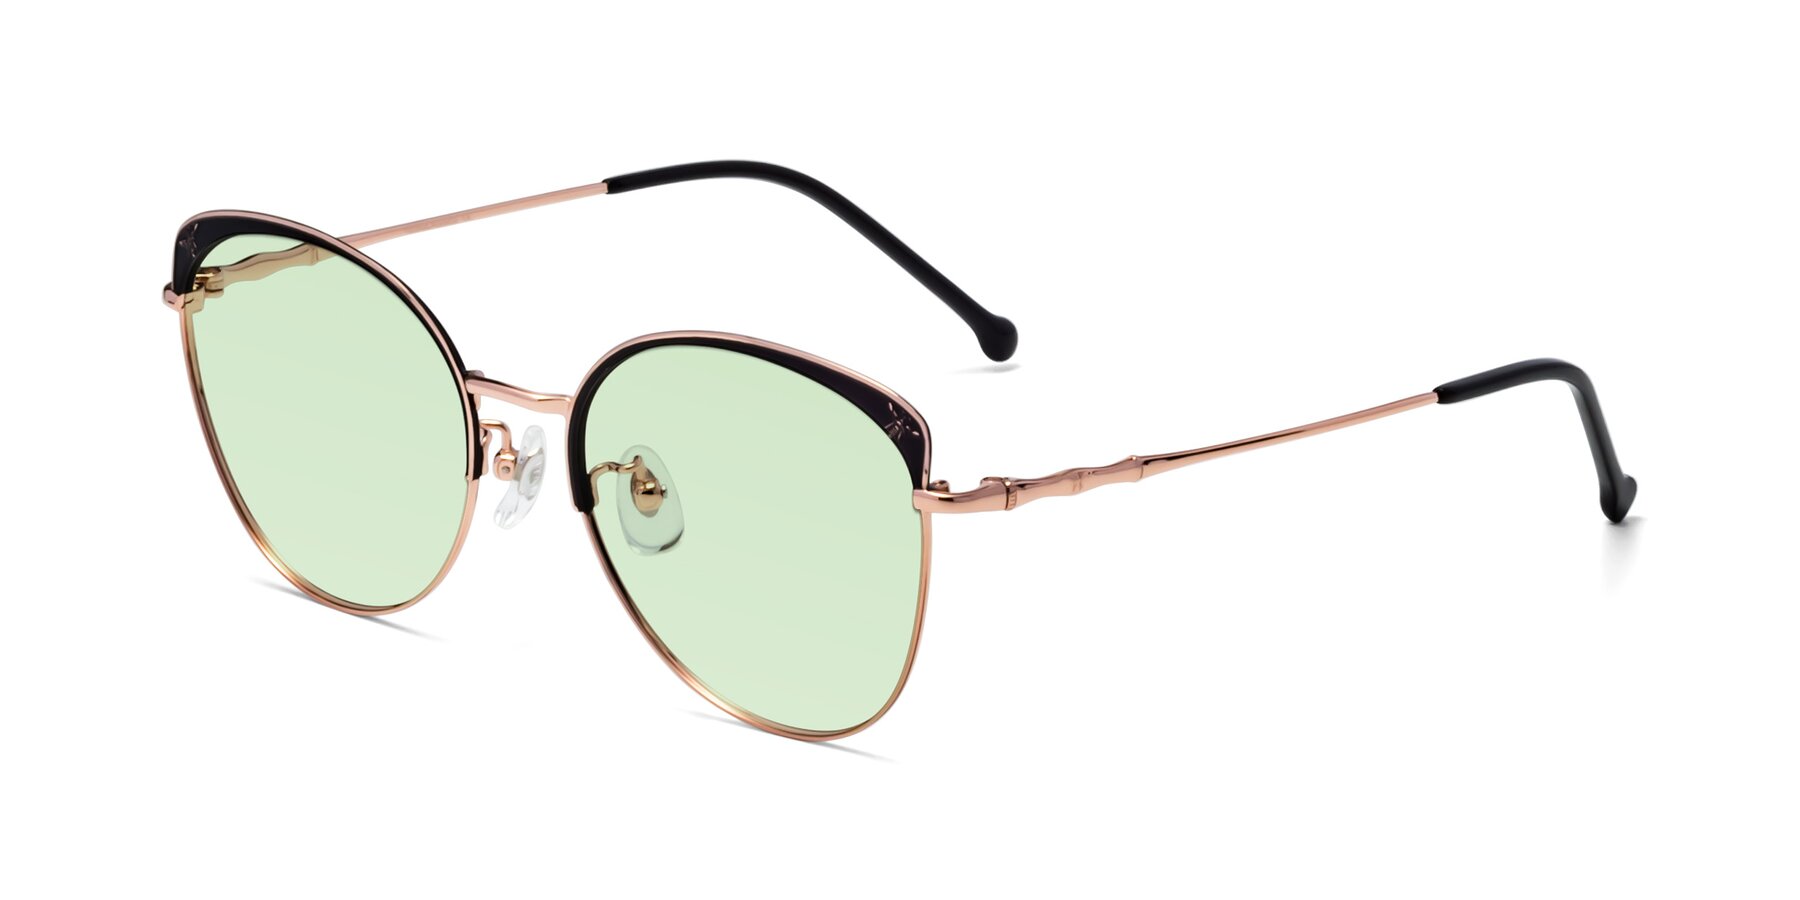 Angle of 18019 in Black-Rose Gold with Light Green Tinted Lenses